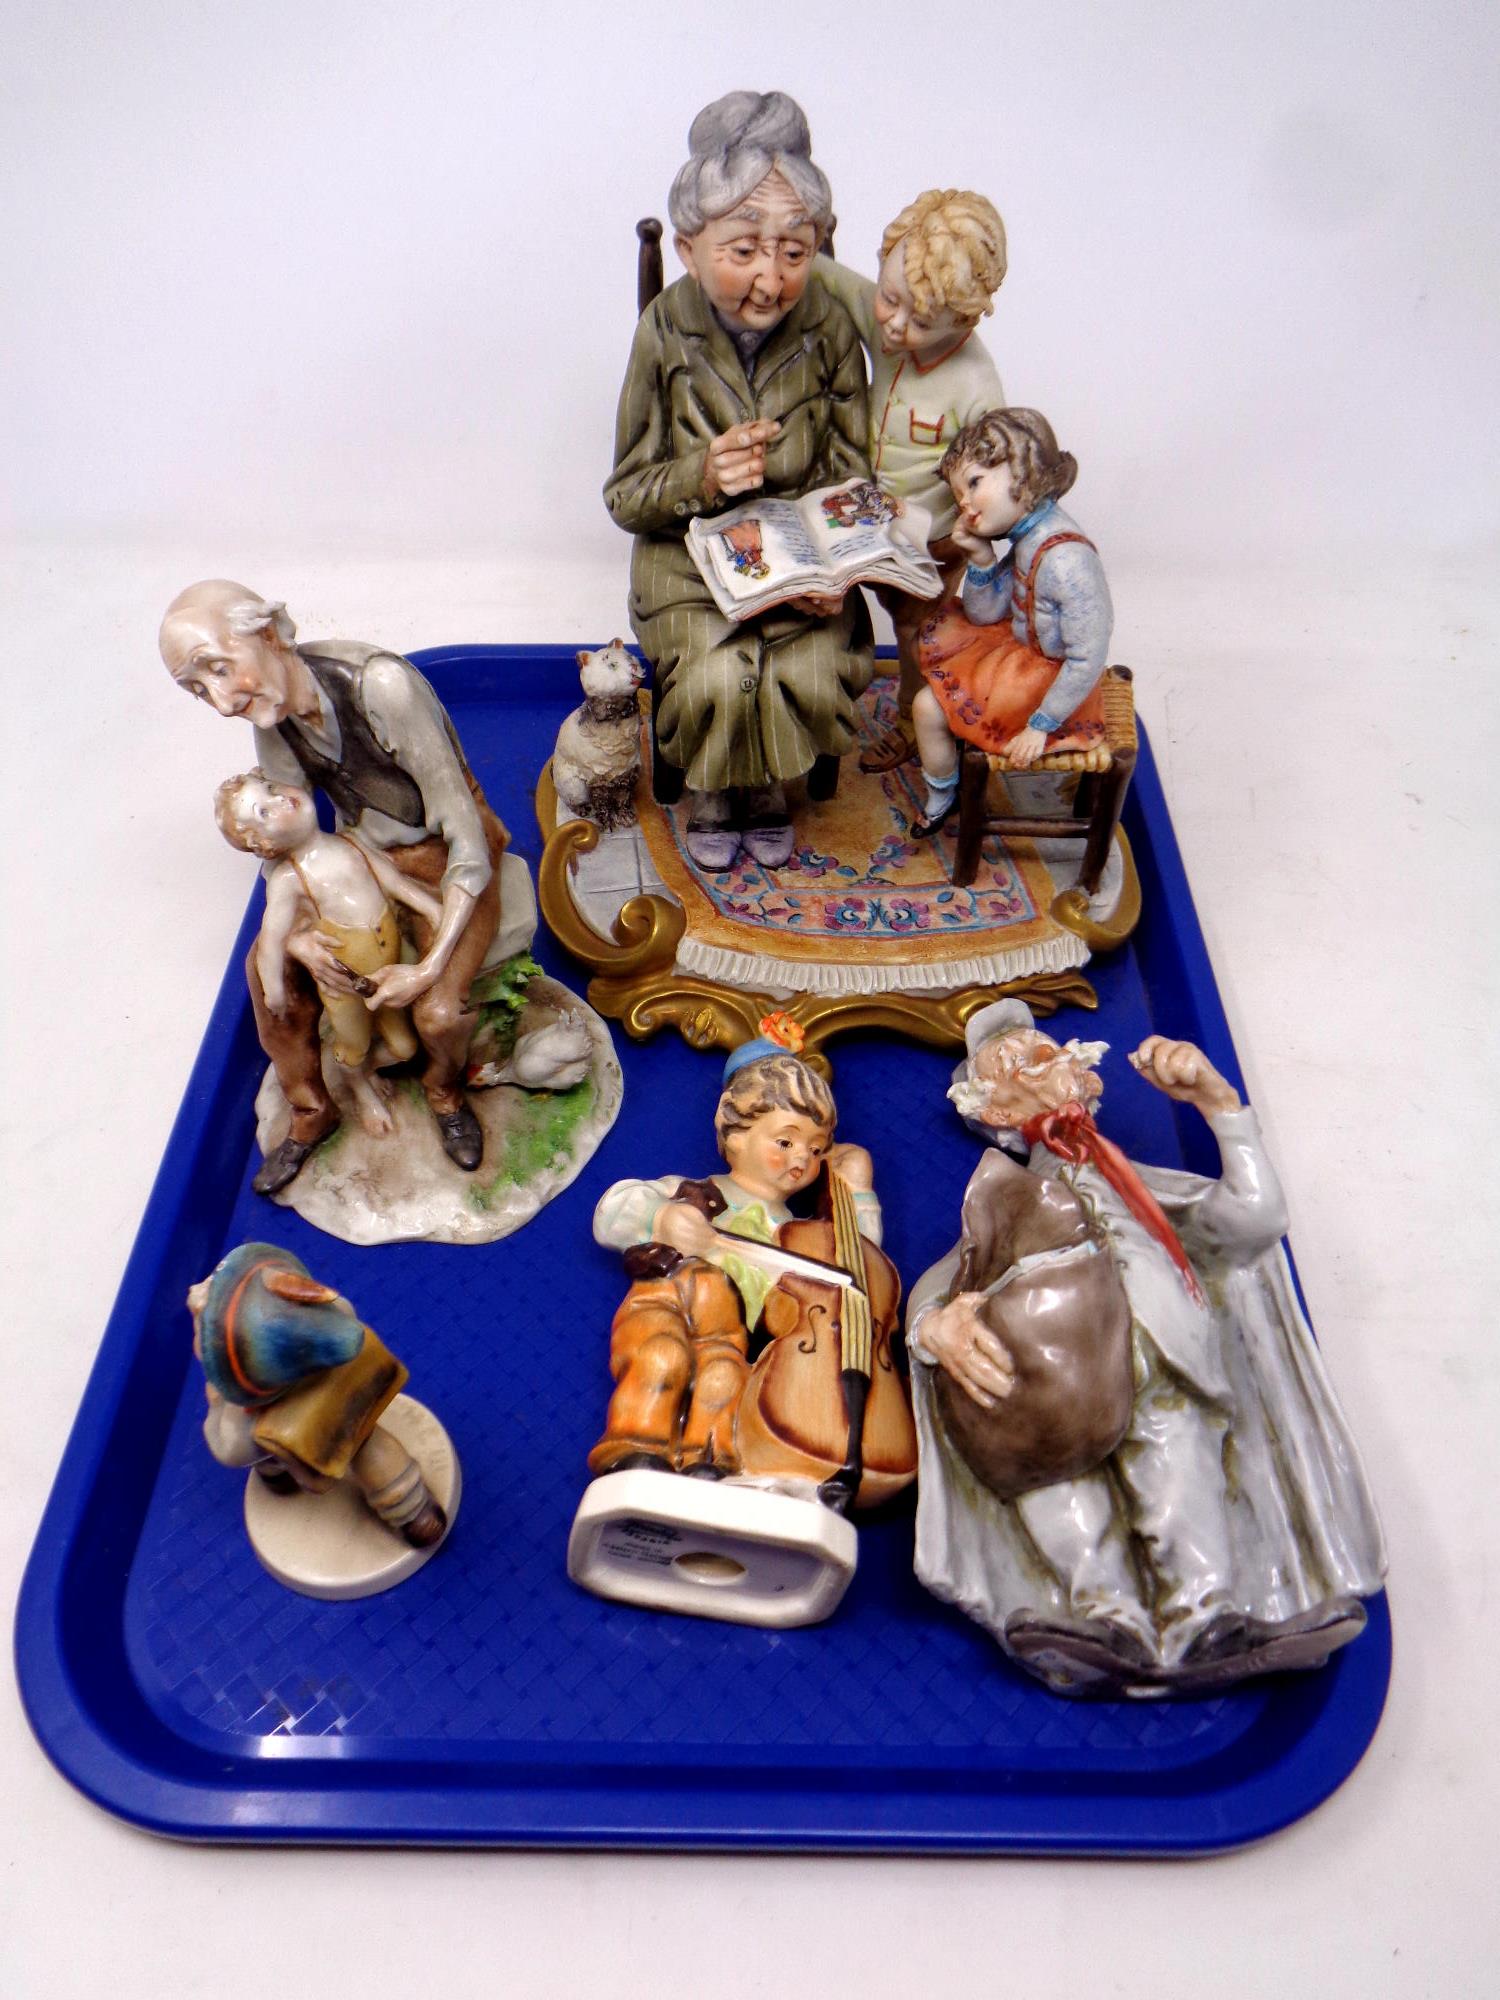 A tray of Continental figurines, Capo figure - Story teller,